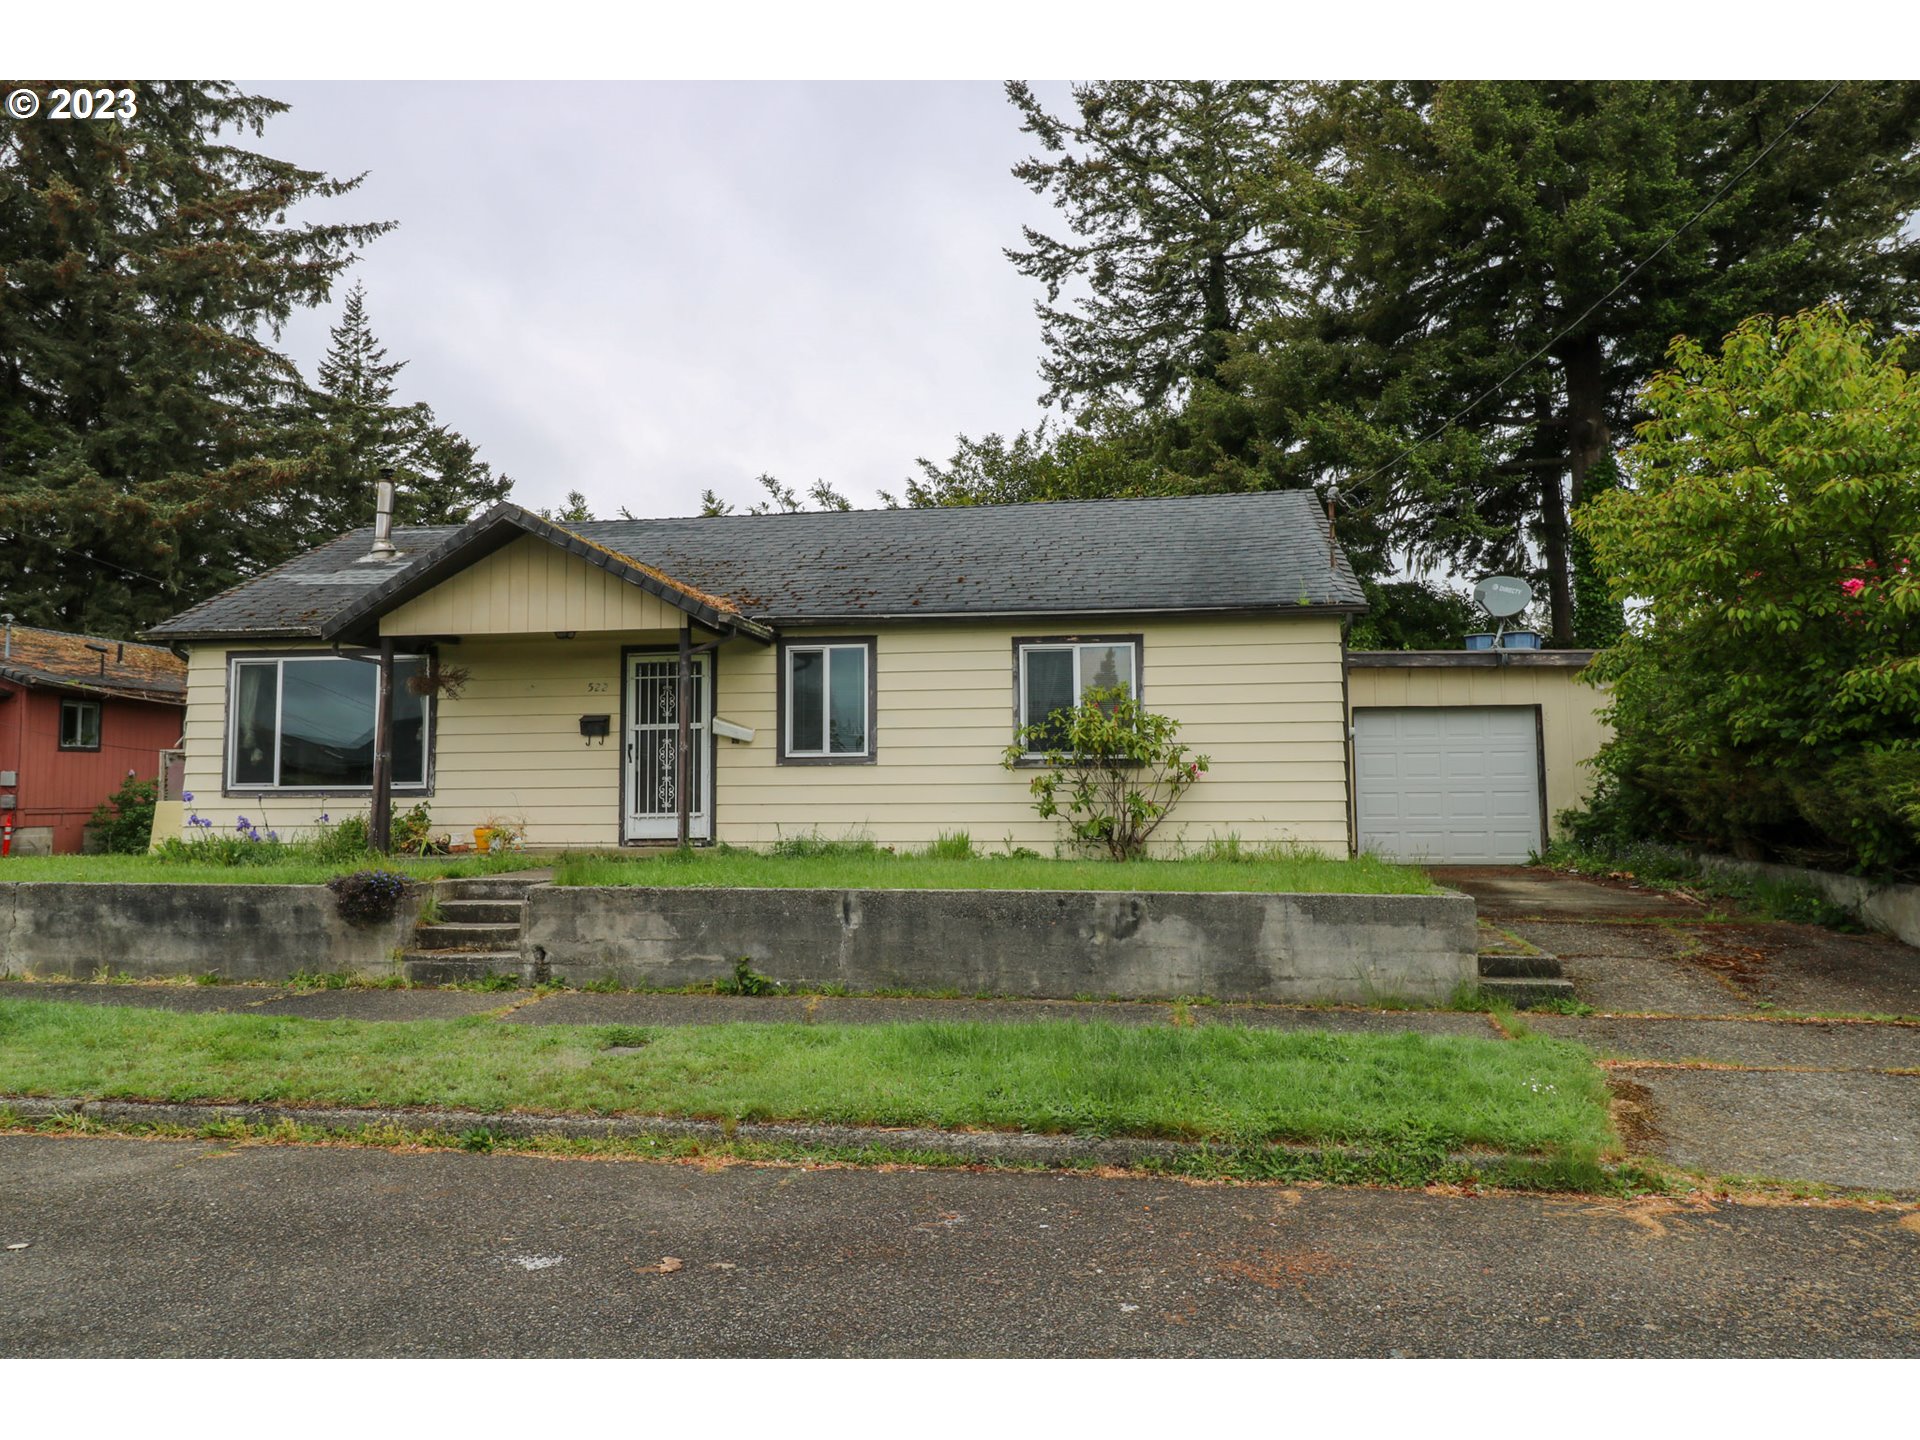 522 N WALL ST, Coos Bay, OR 97420